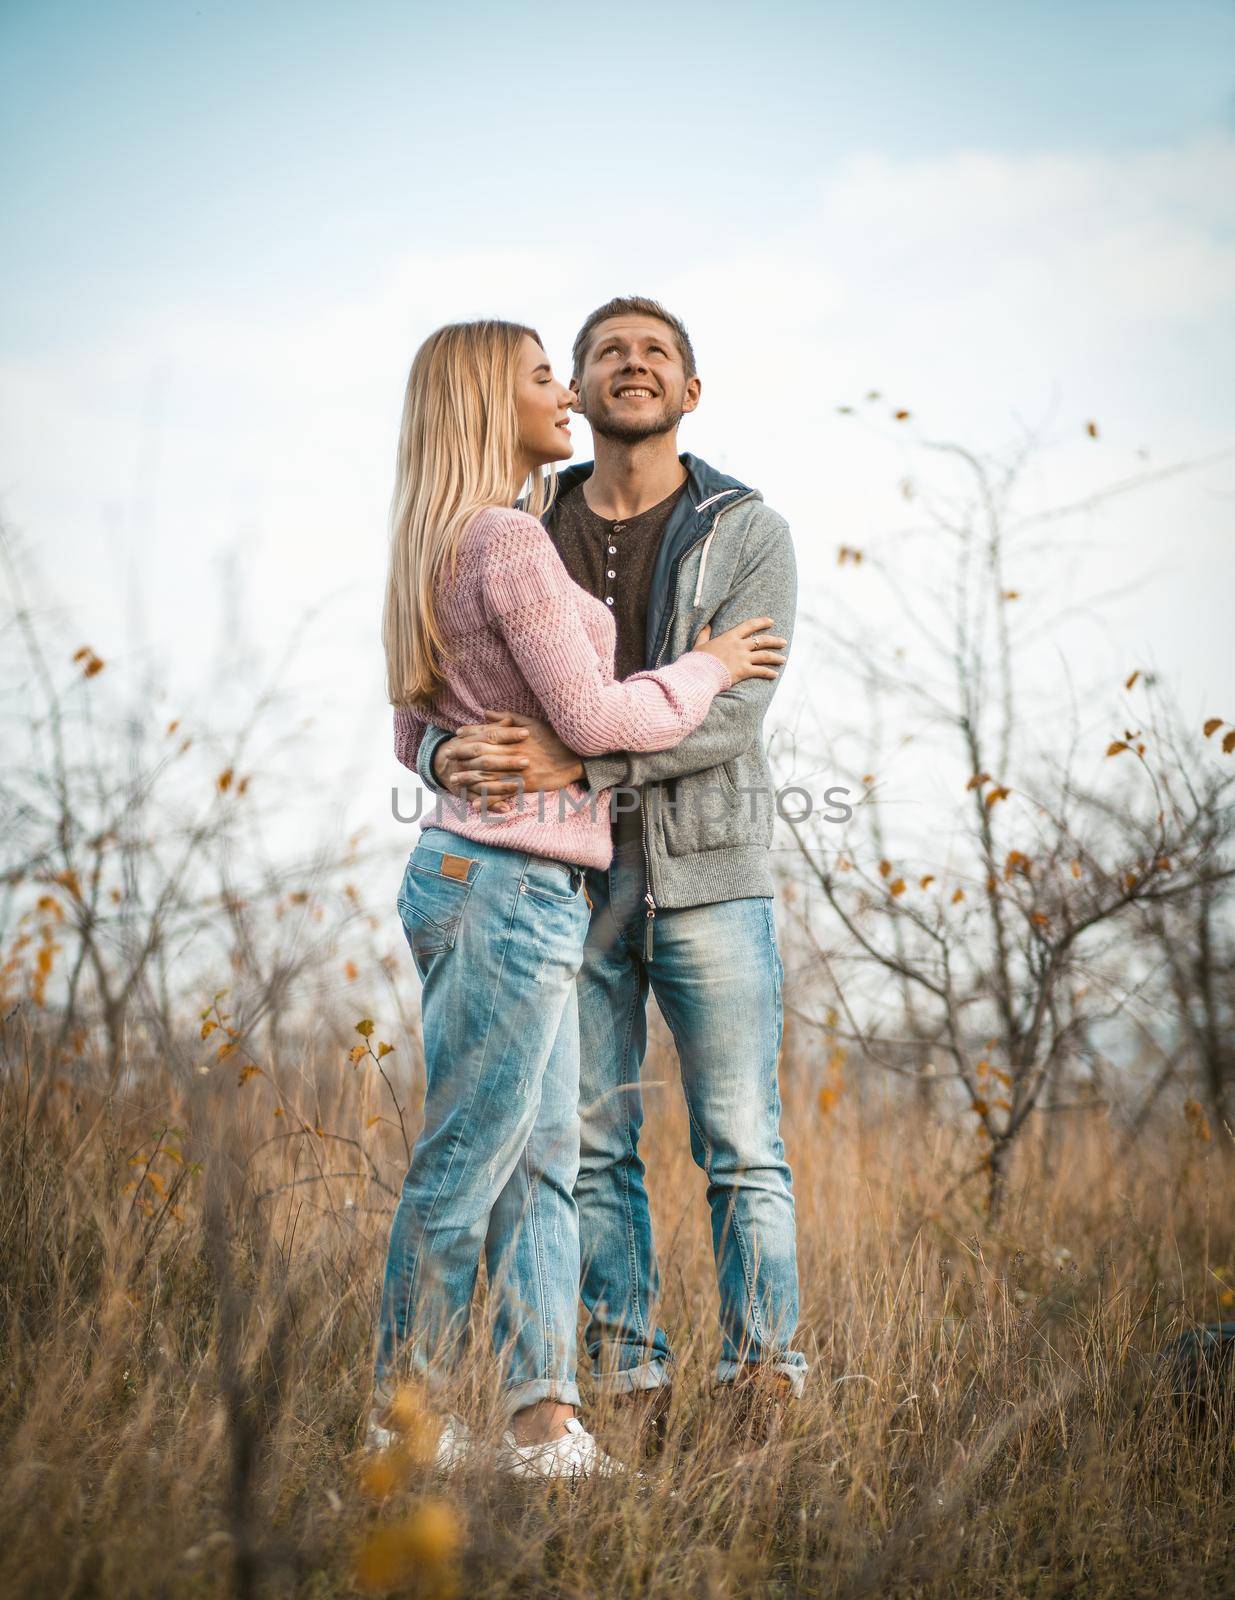 Couple In Love Is Standing In Embrace Enjoying The Autumn Nature, Young Caucasian Man Raised His Face To Sky Hugging Woman, Two Tourists Standing On Grass Outdoors, Blue Sky On Background, Full Length